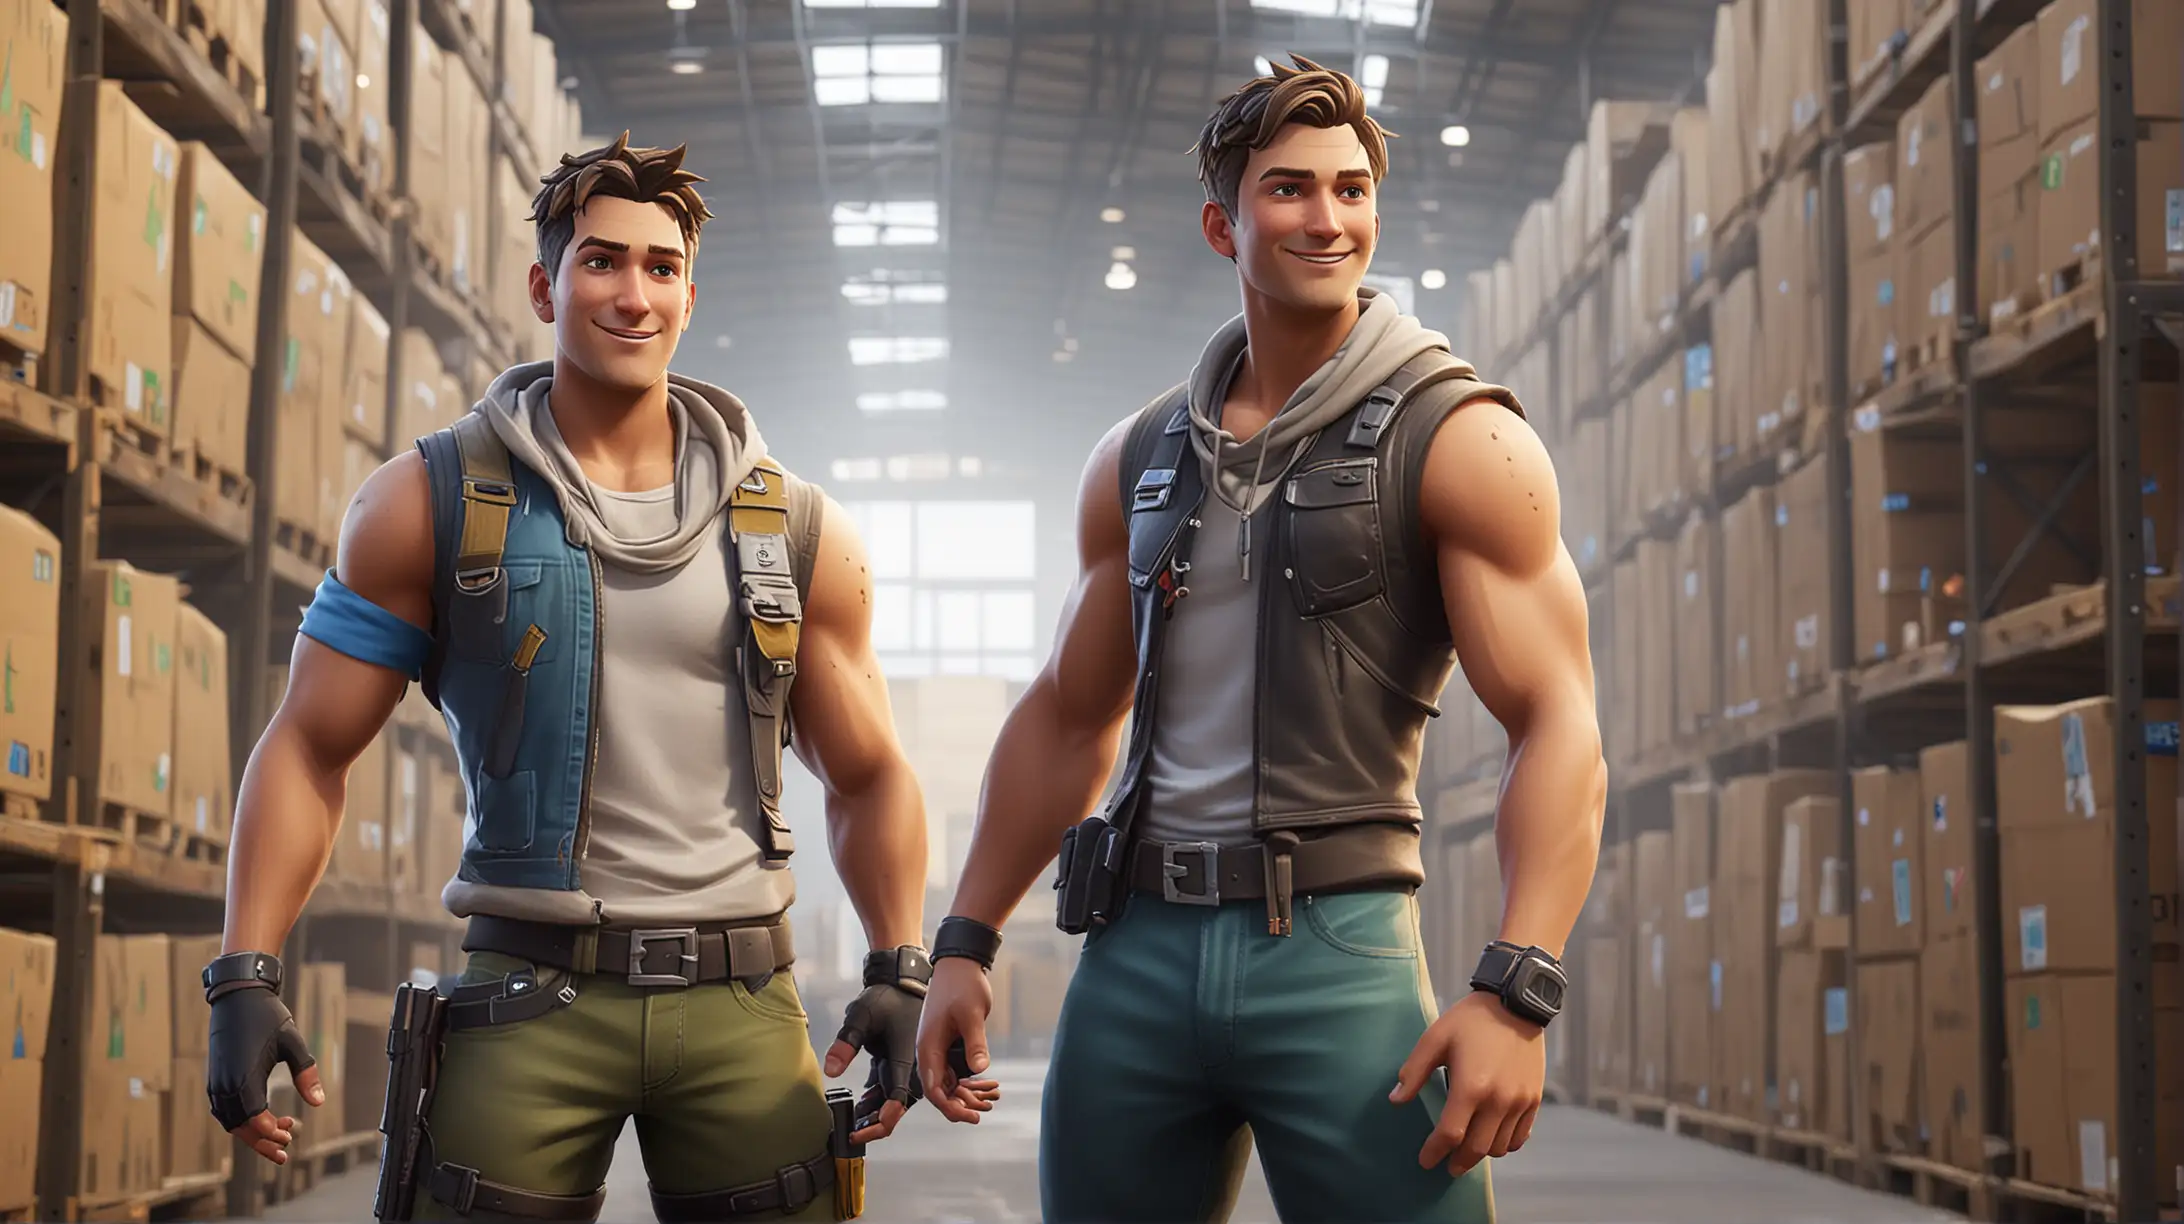 There are two colorful male Fortnite characters,
the location is inside a warehouse,
they are facing eachother,
they are smiling,
Caucasian
